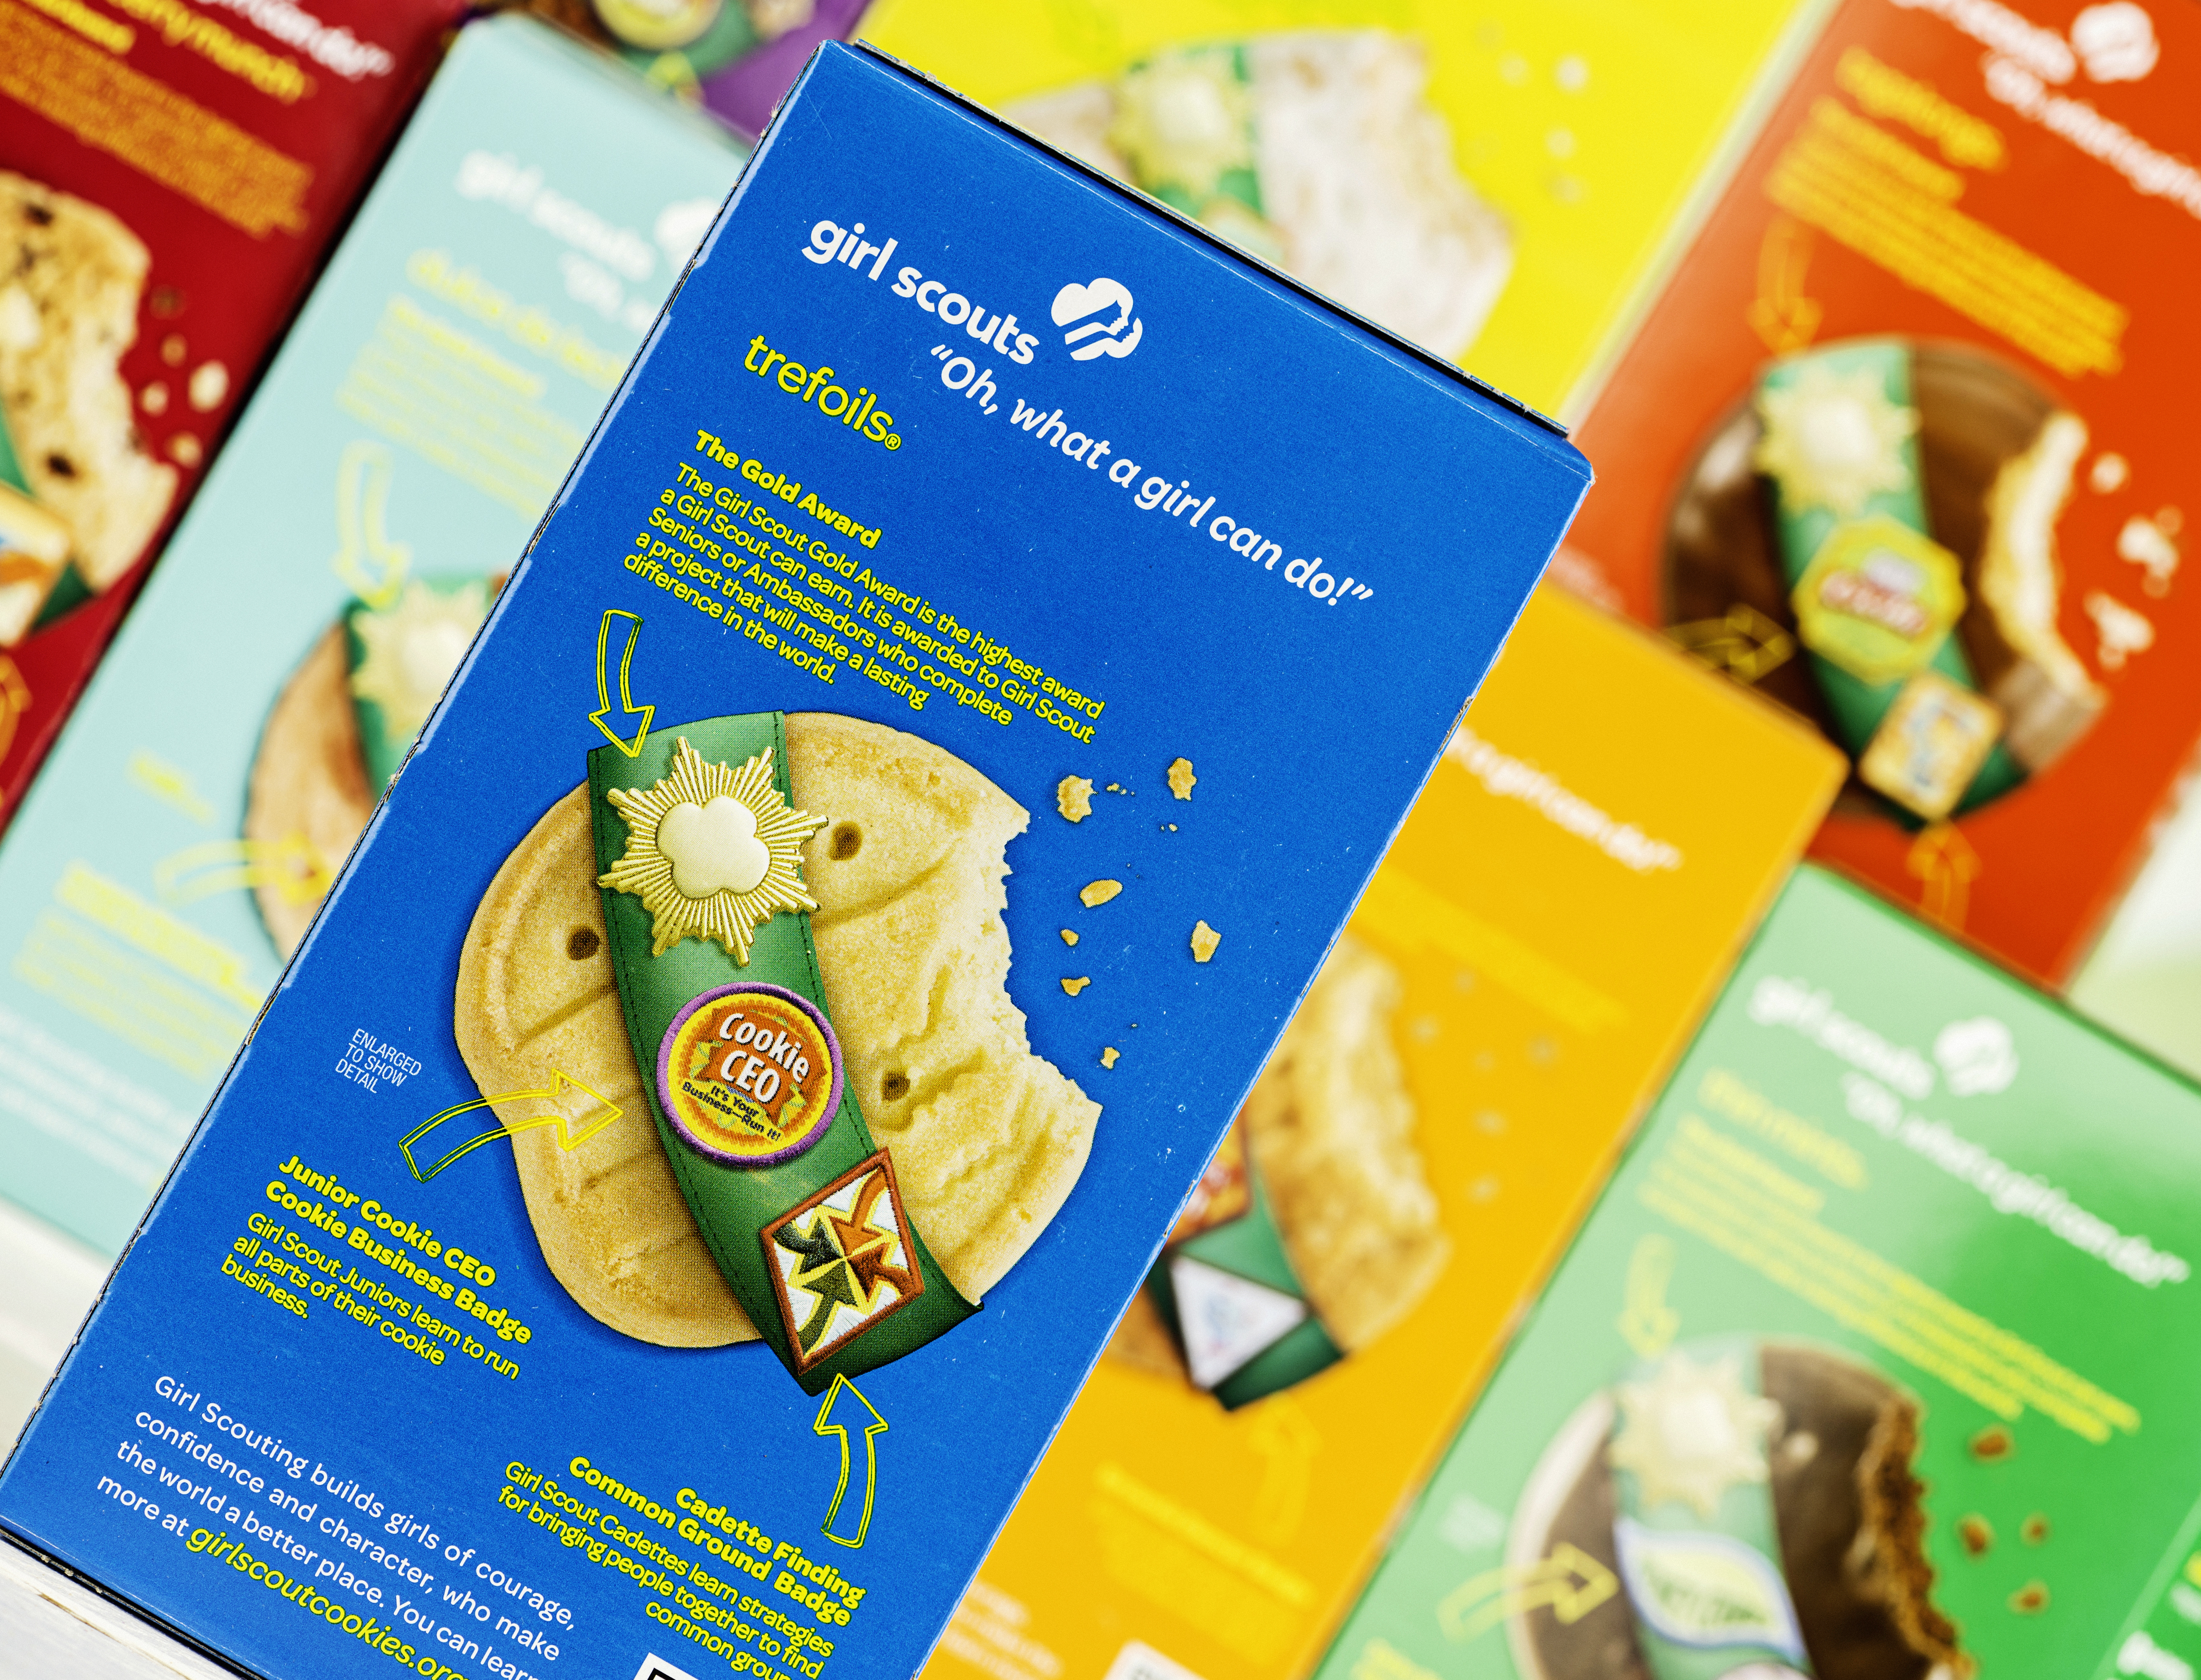 Girl Scout Cookie Prices Are Going Up Again